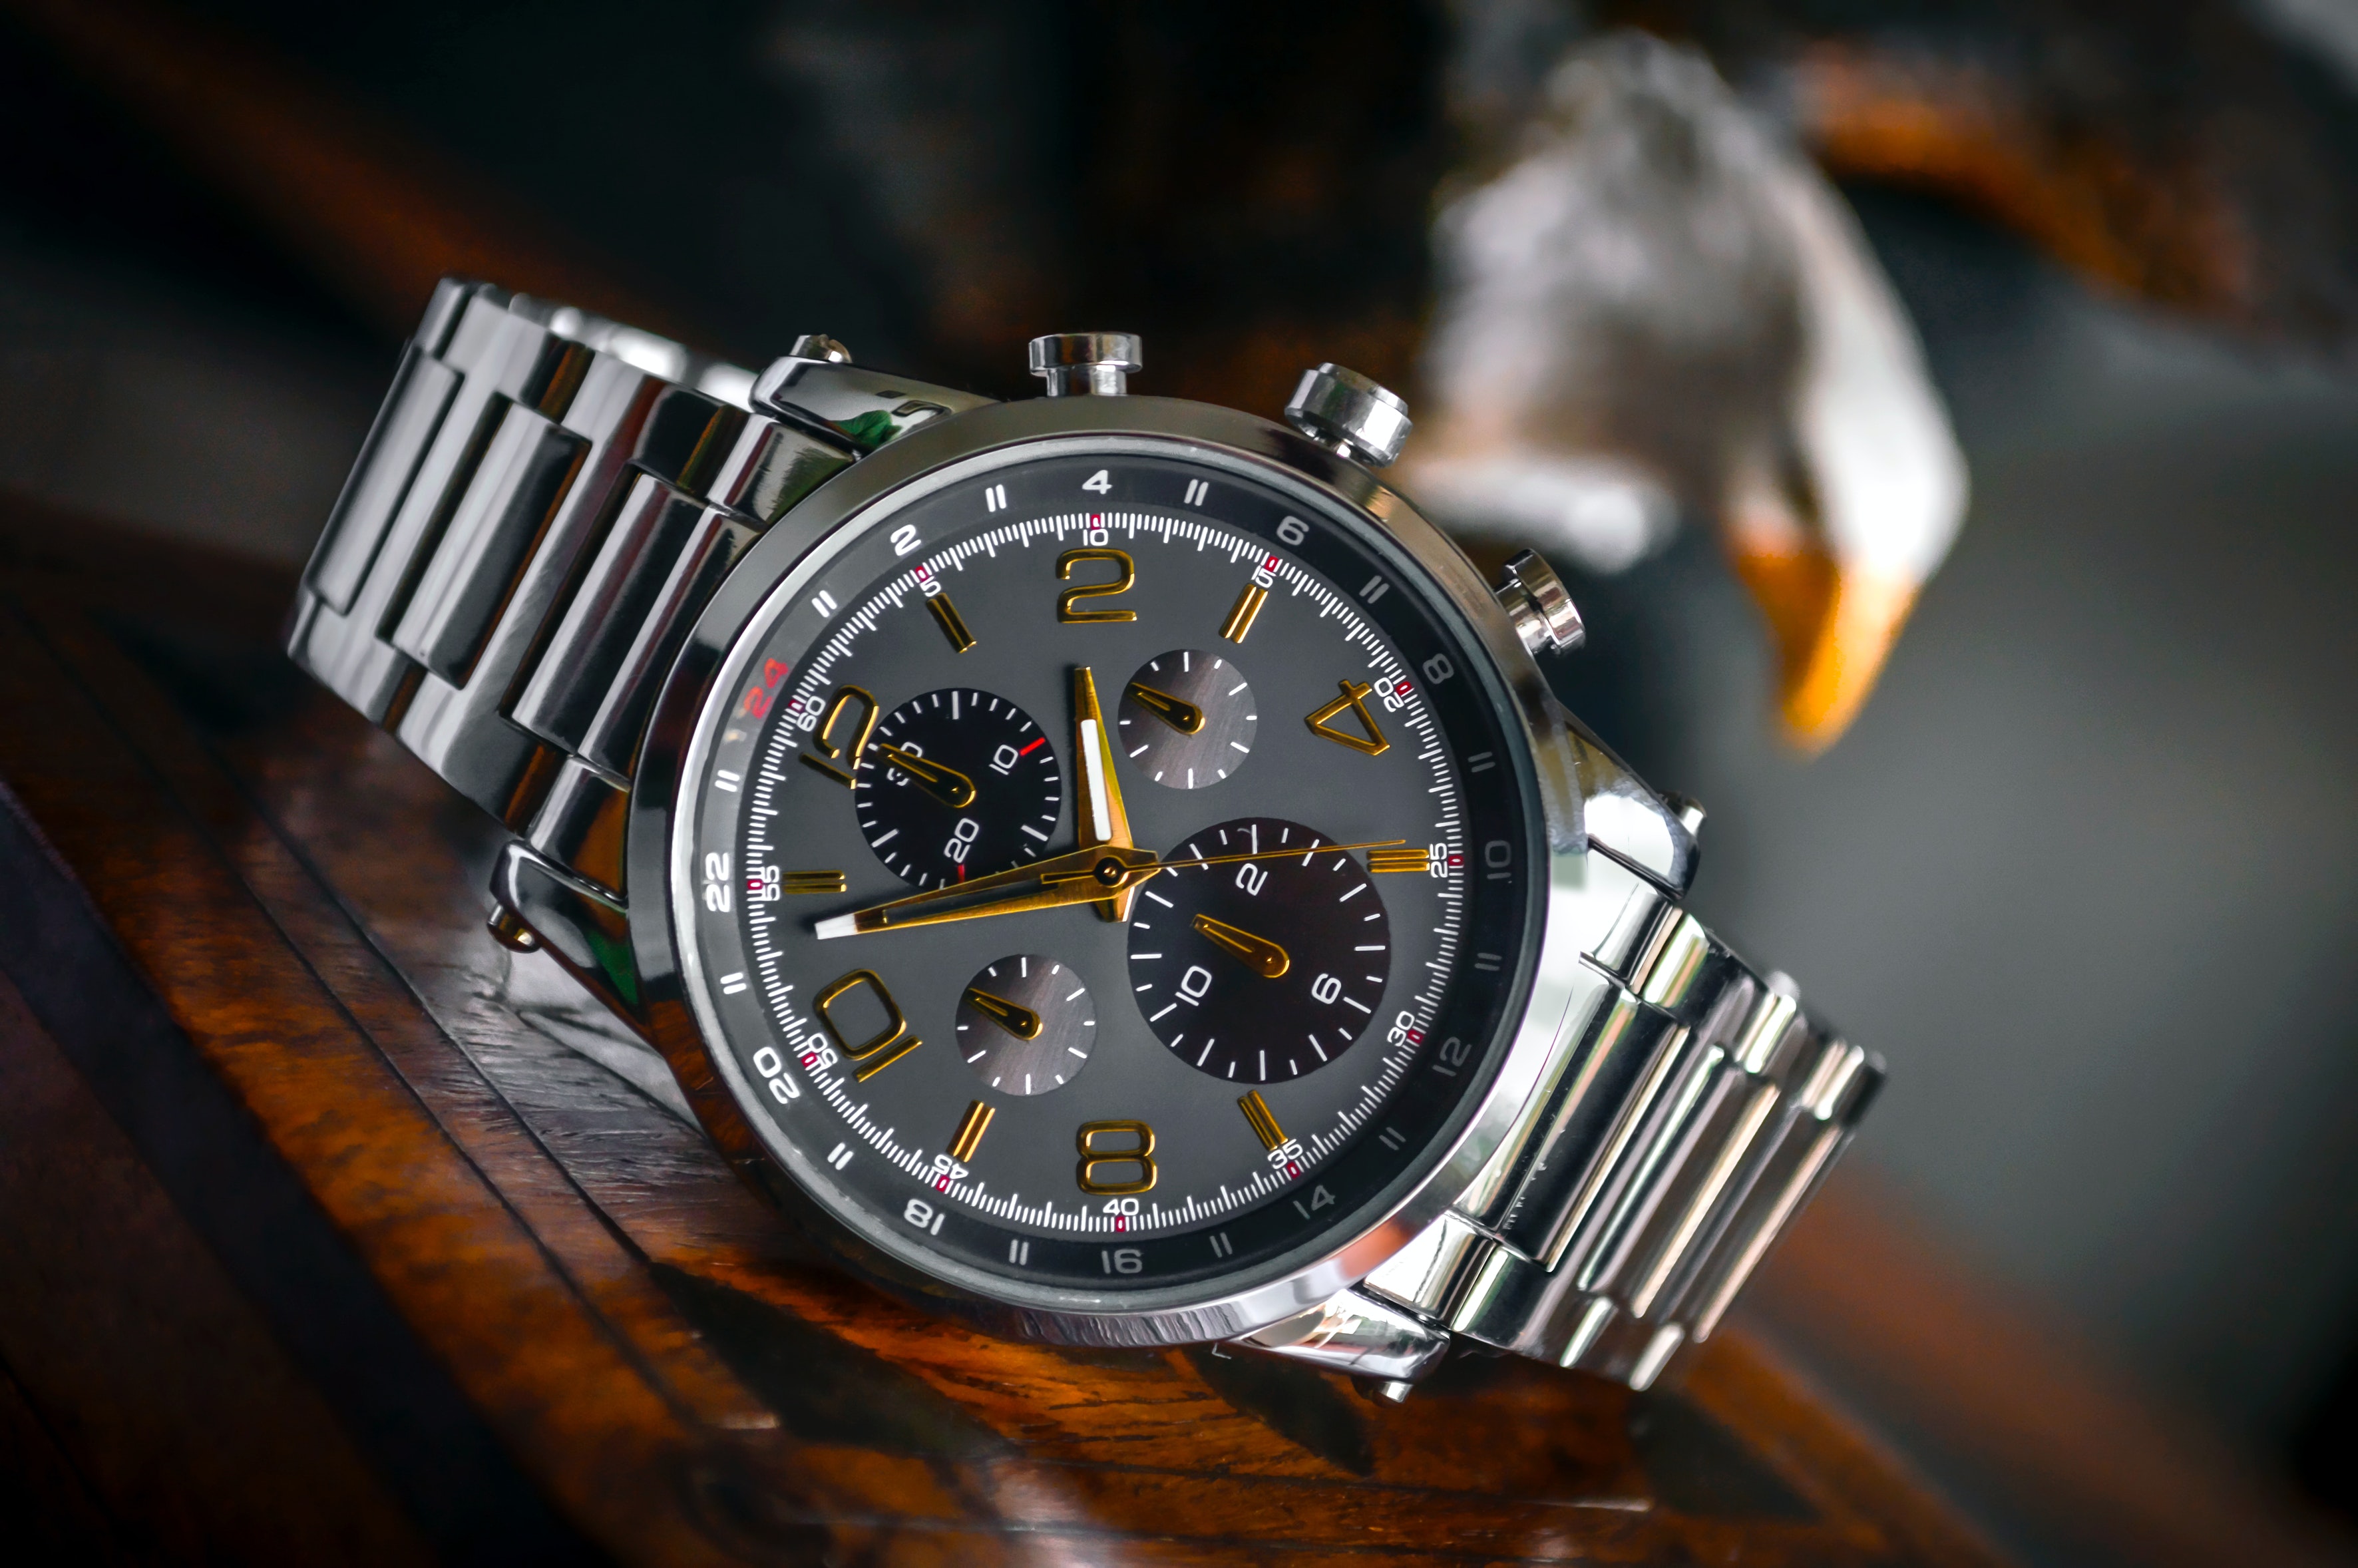 Shop for a New Timepiece or Get Your Watch Repaired in Redmond